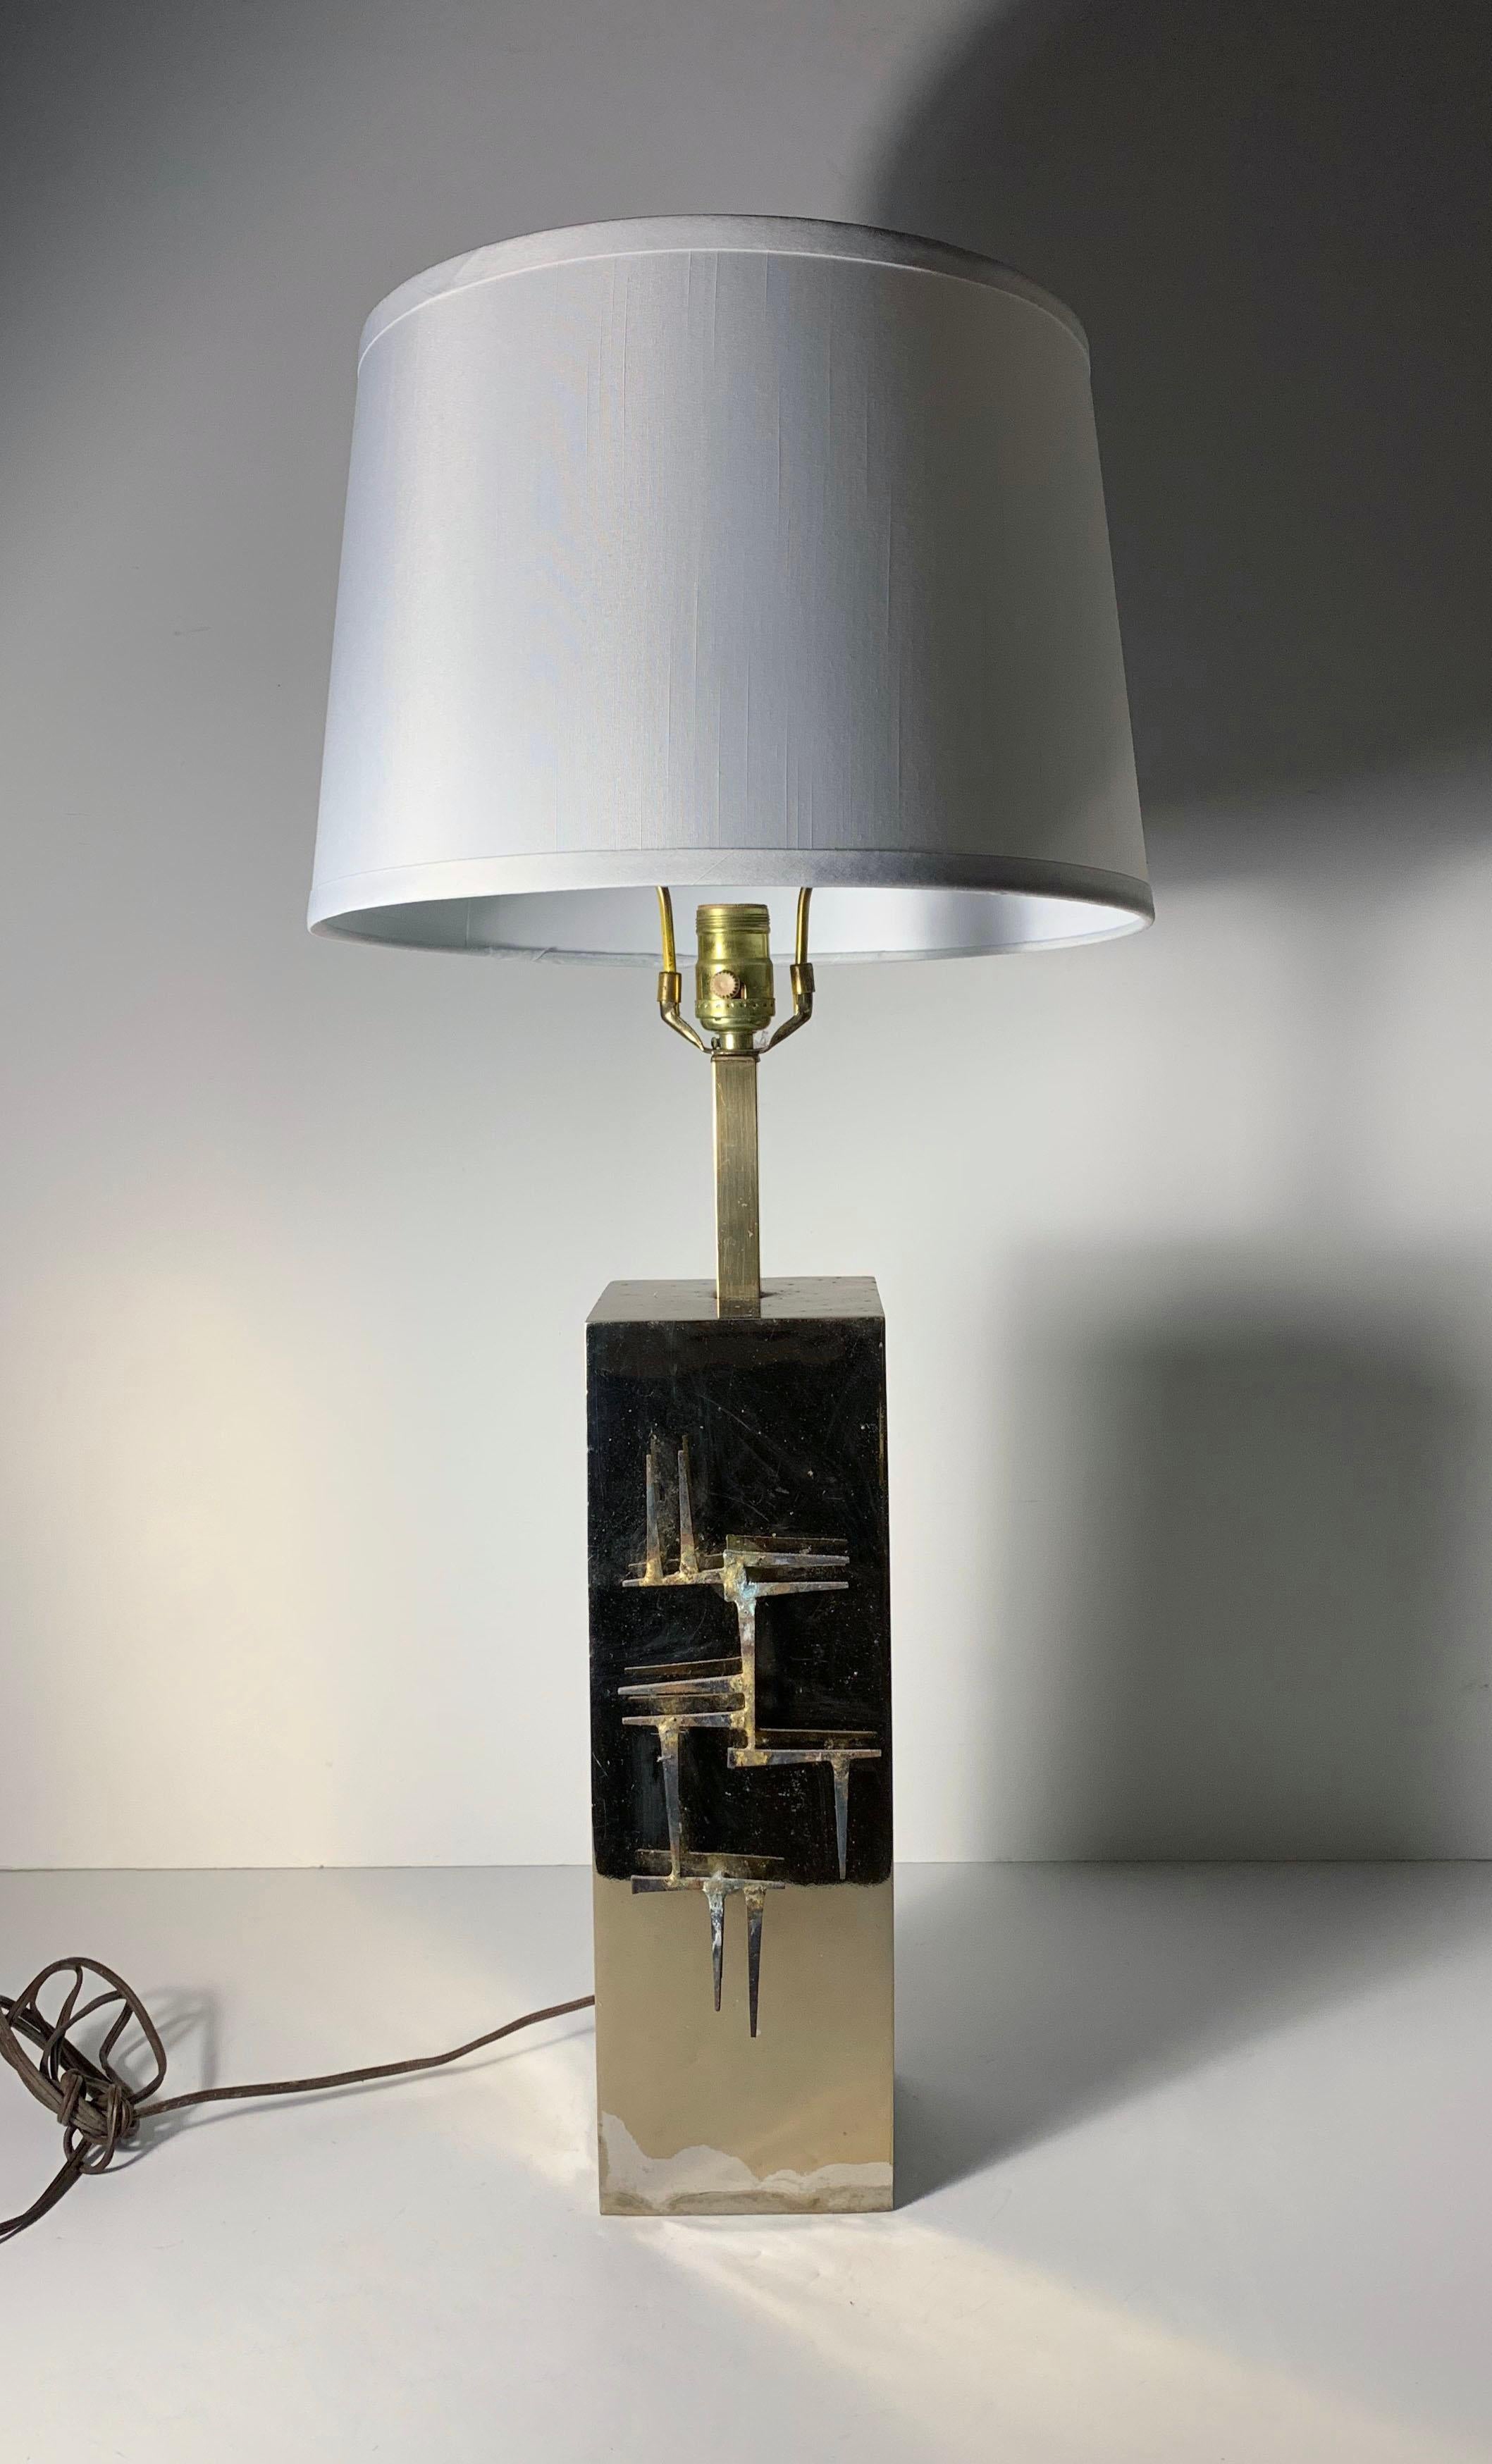 Brutalist brass table lamp with abstract nail applique relief by Laurel
Some loss to brass finish towards bottom as shown. some minor pitting and patina aging.
Sold sans shade.

Style of Paul Evans, Silas Seandel
      